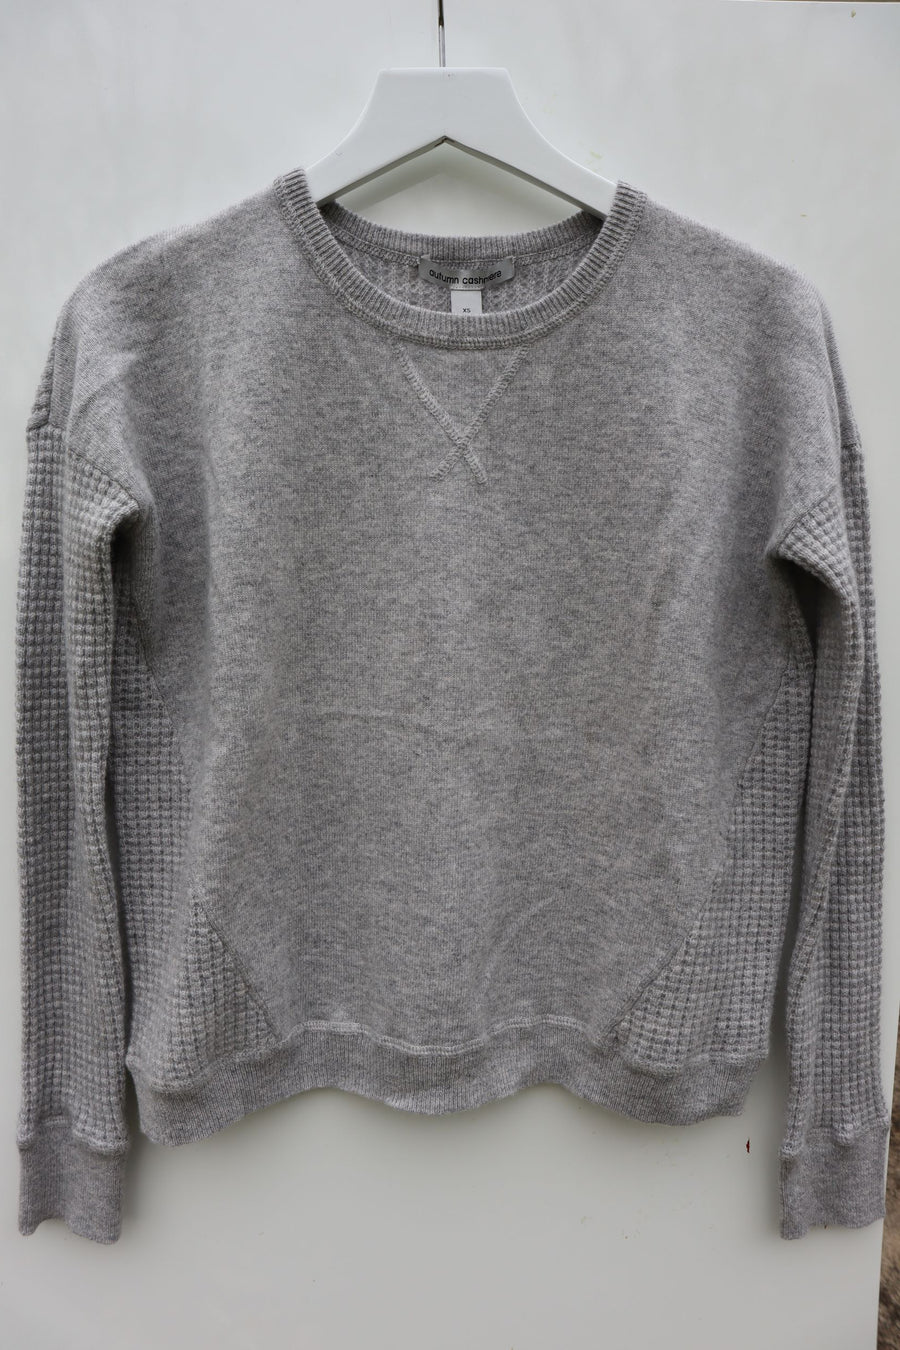 AUTUMN CASHMERE Thermal Sweatshirt in Color: 